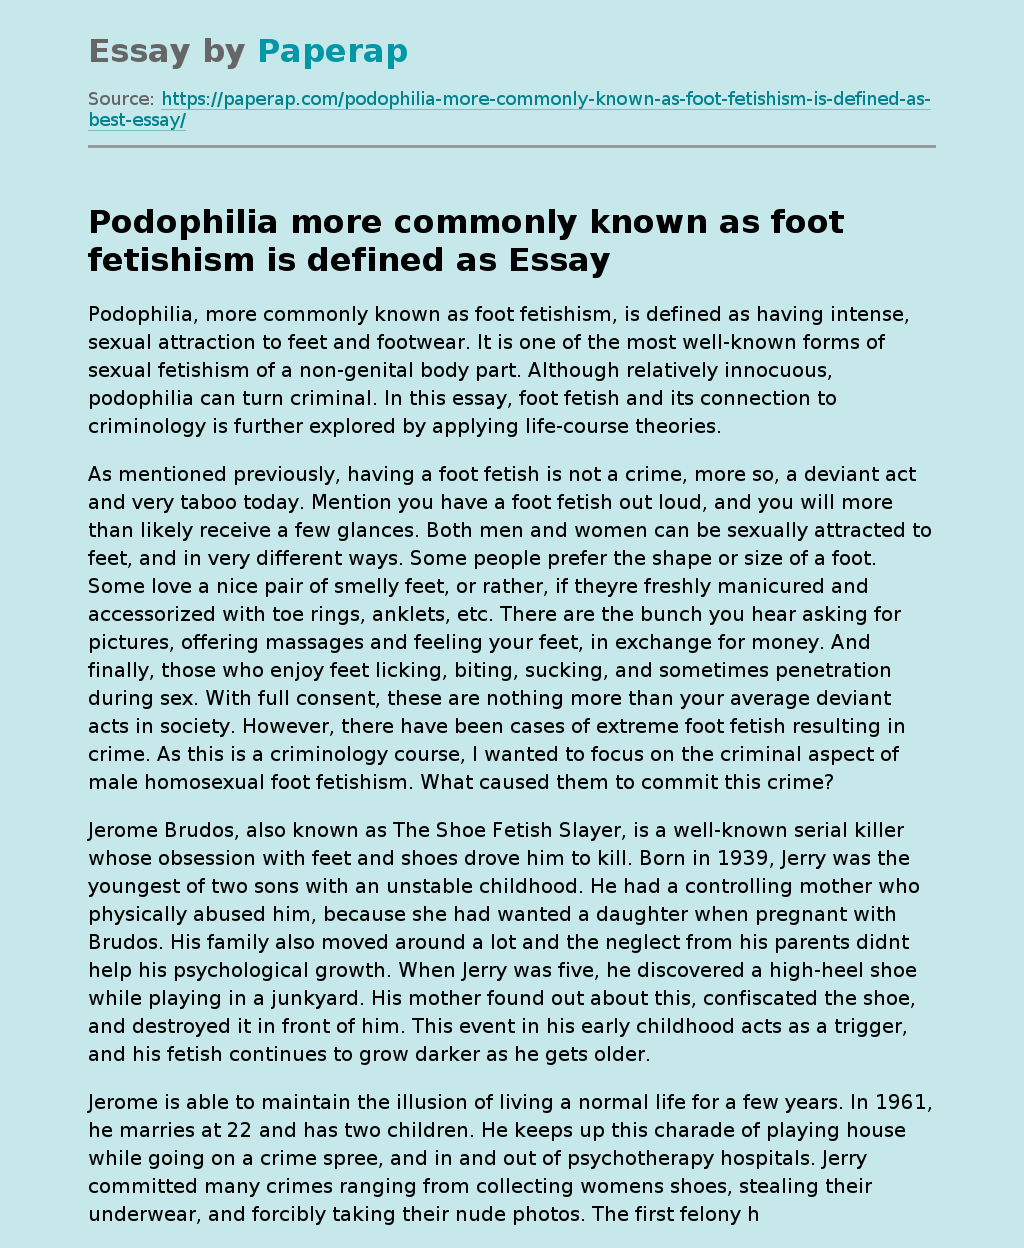 Podophilia more commonly known as foot fetishism is defined as